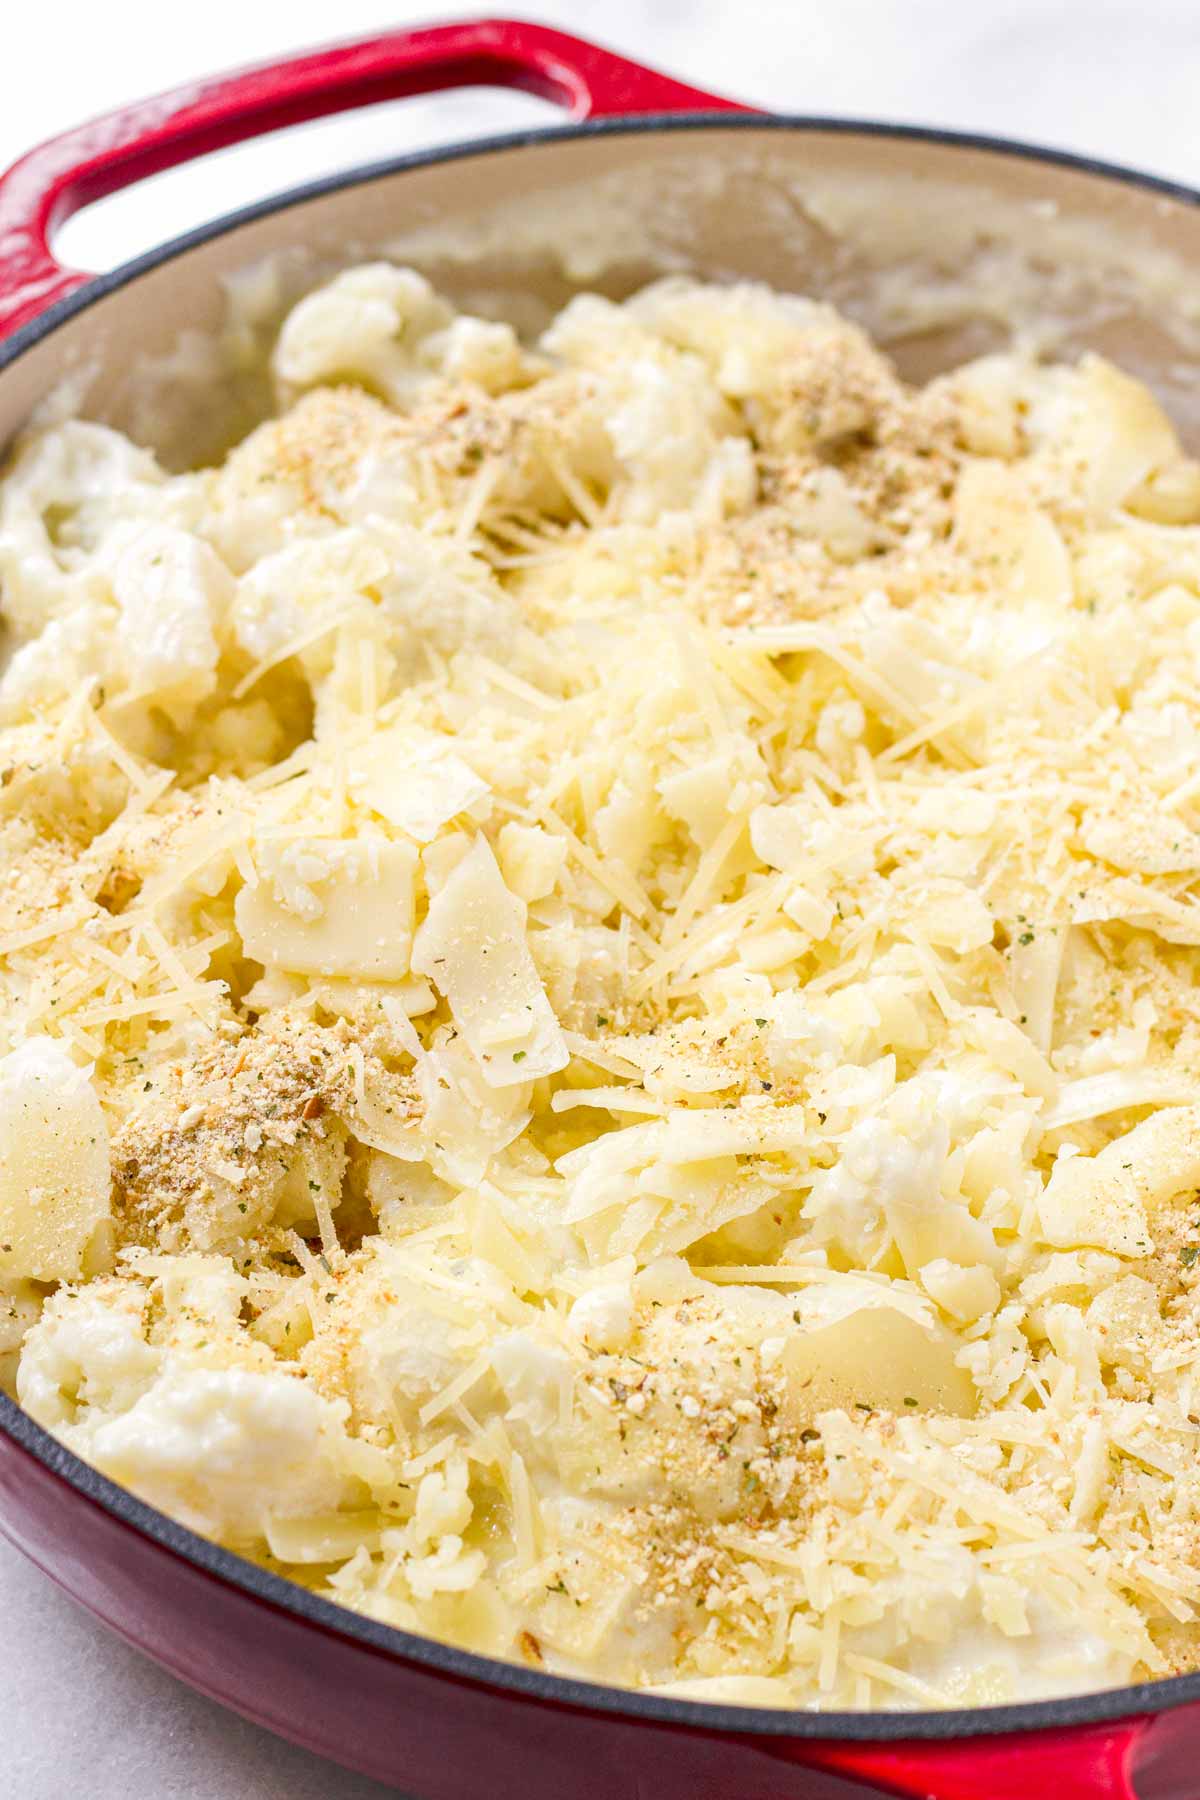 cauliflower mixed with cheese sauce and topped with cheese before baking